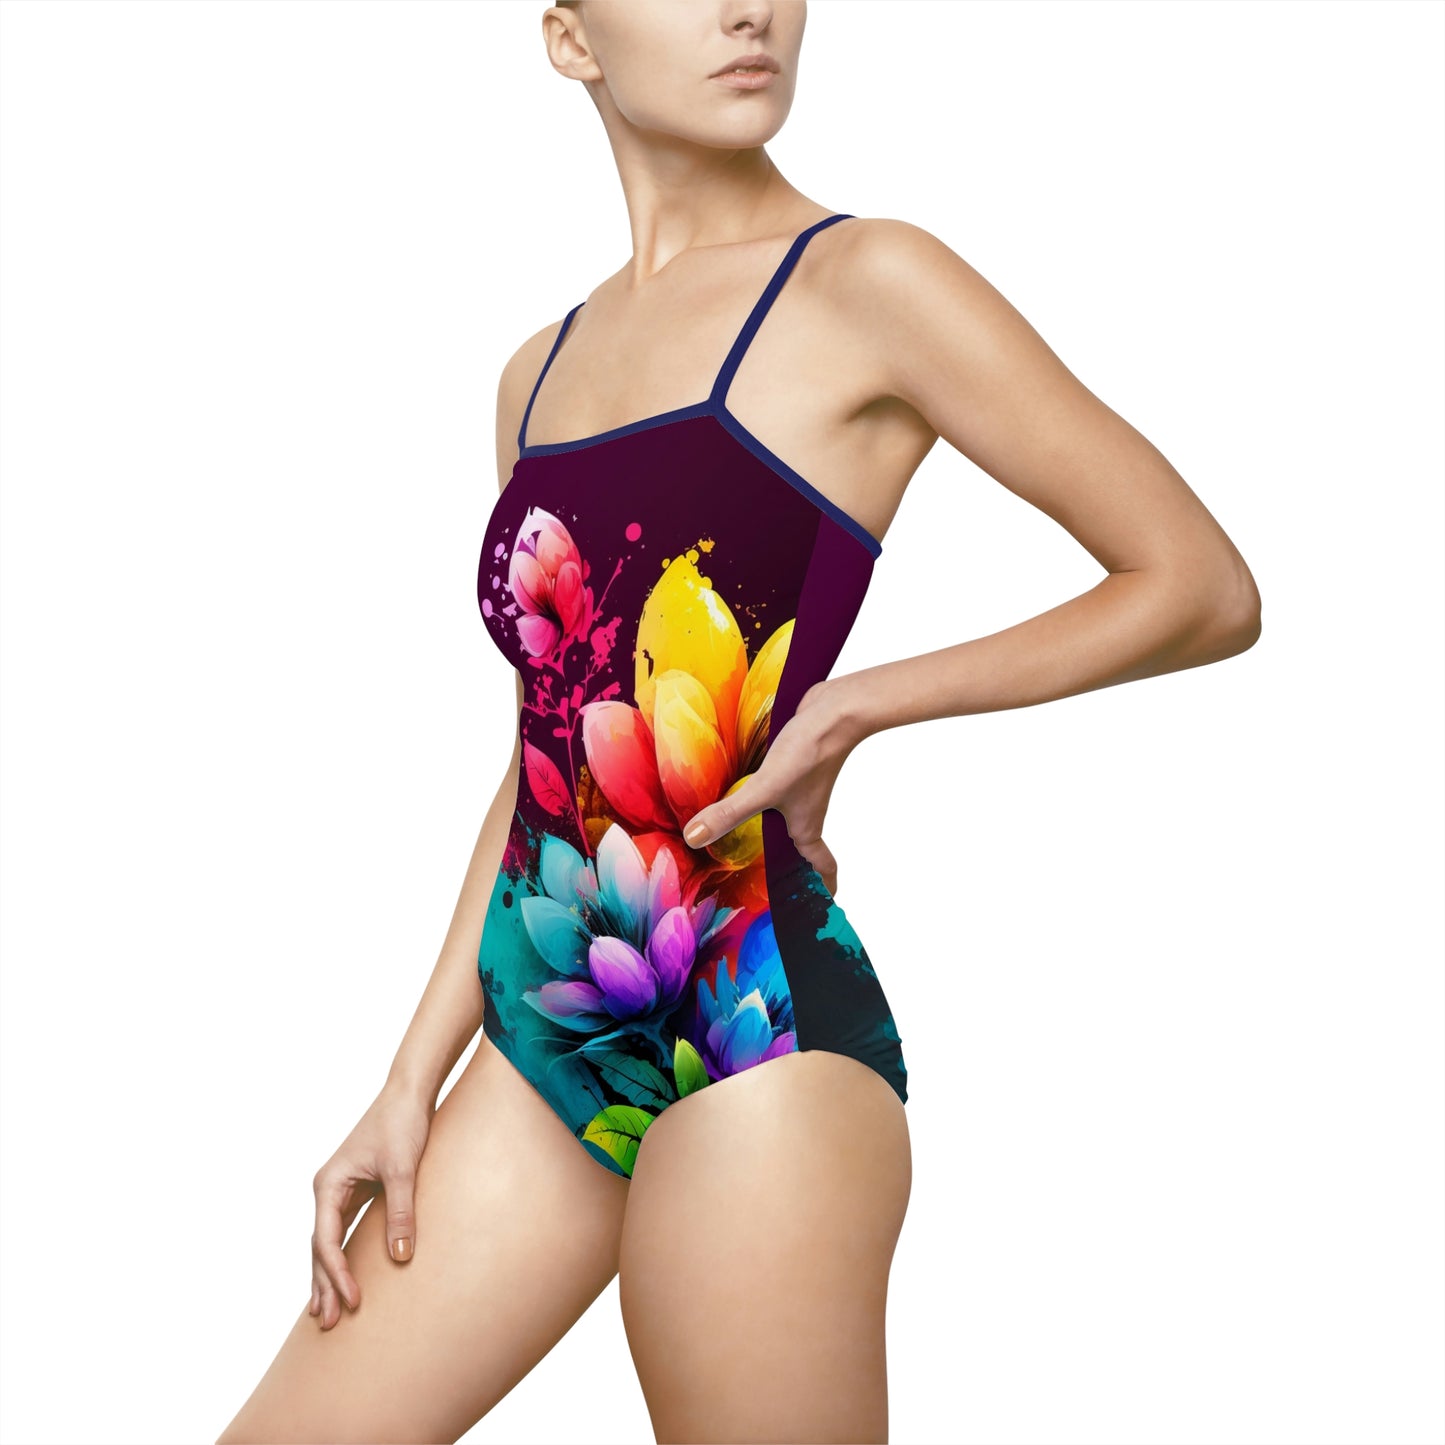 Women's One-piece Swimsuit (AOP) bright spring flowers 3